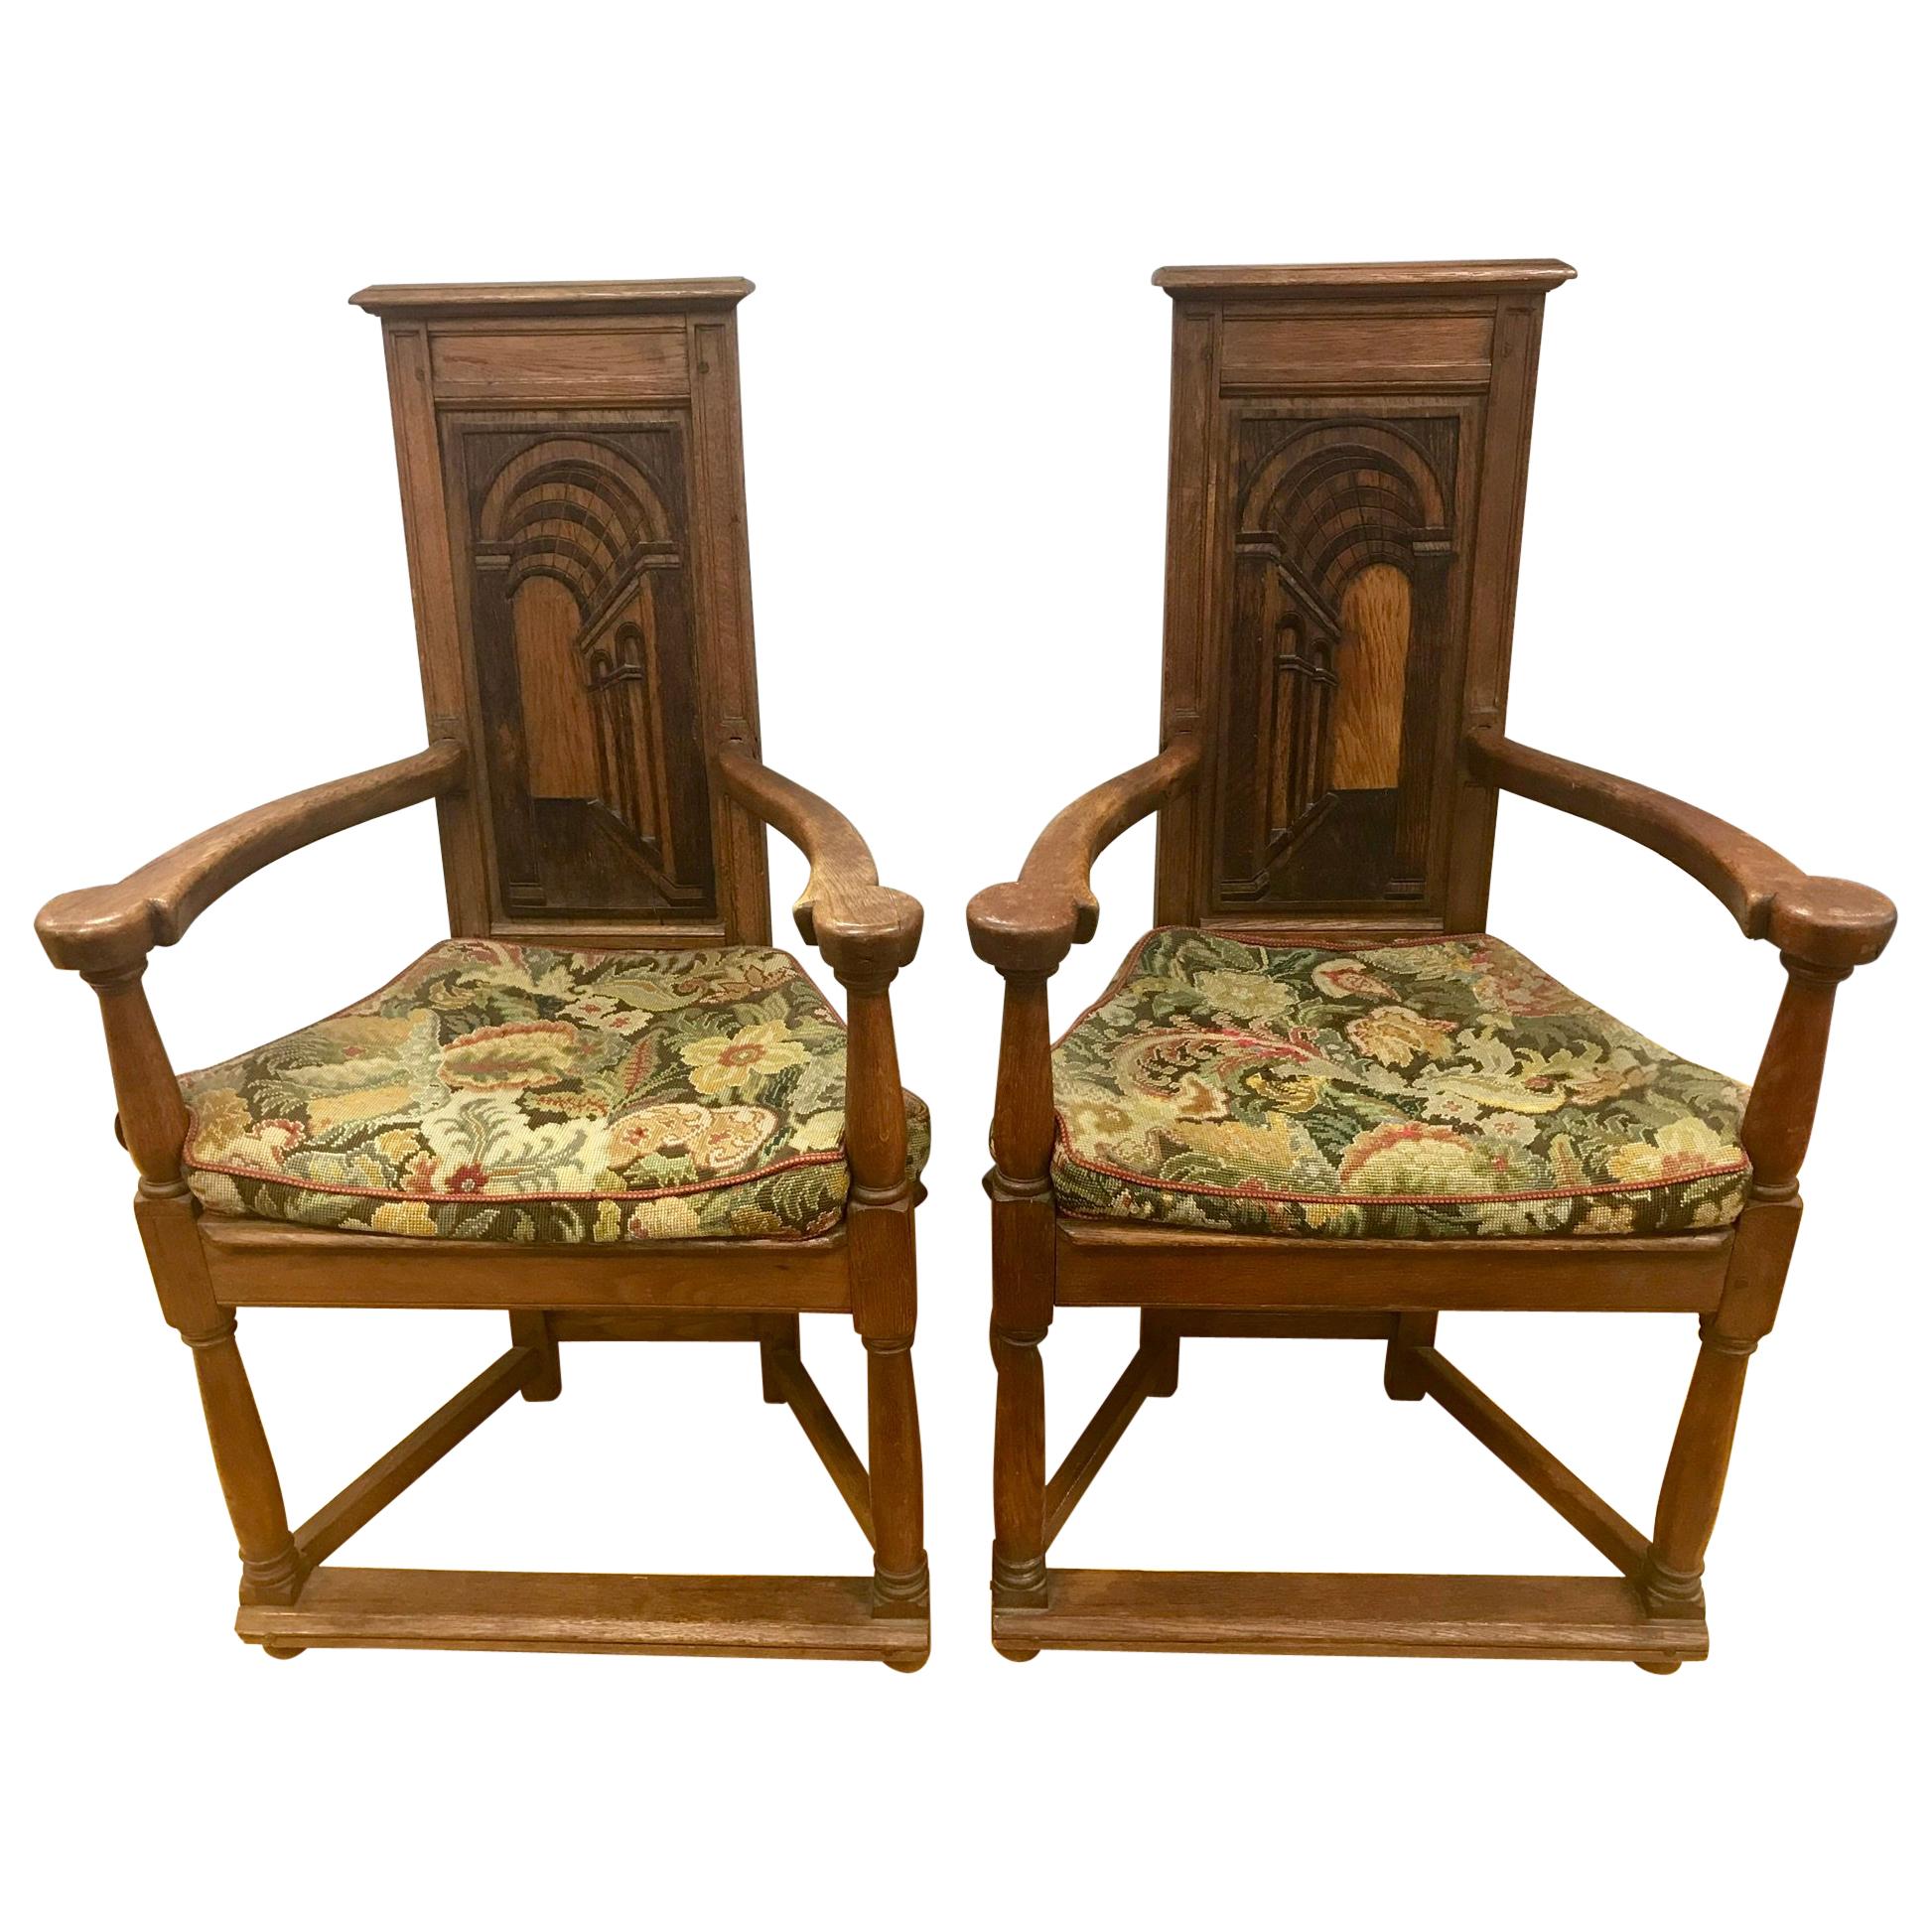 Antique French Gothic Armchairs Chairs with Original Tapestry Upholstery